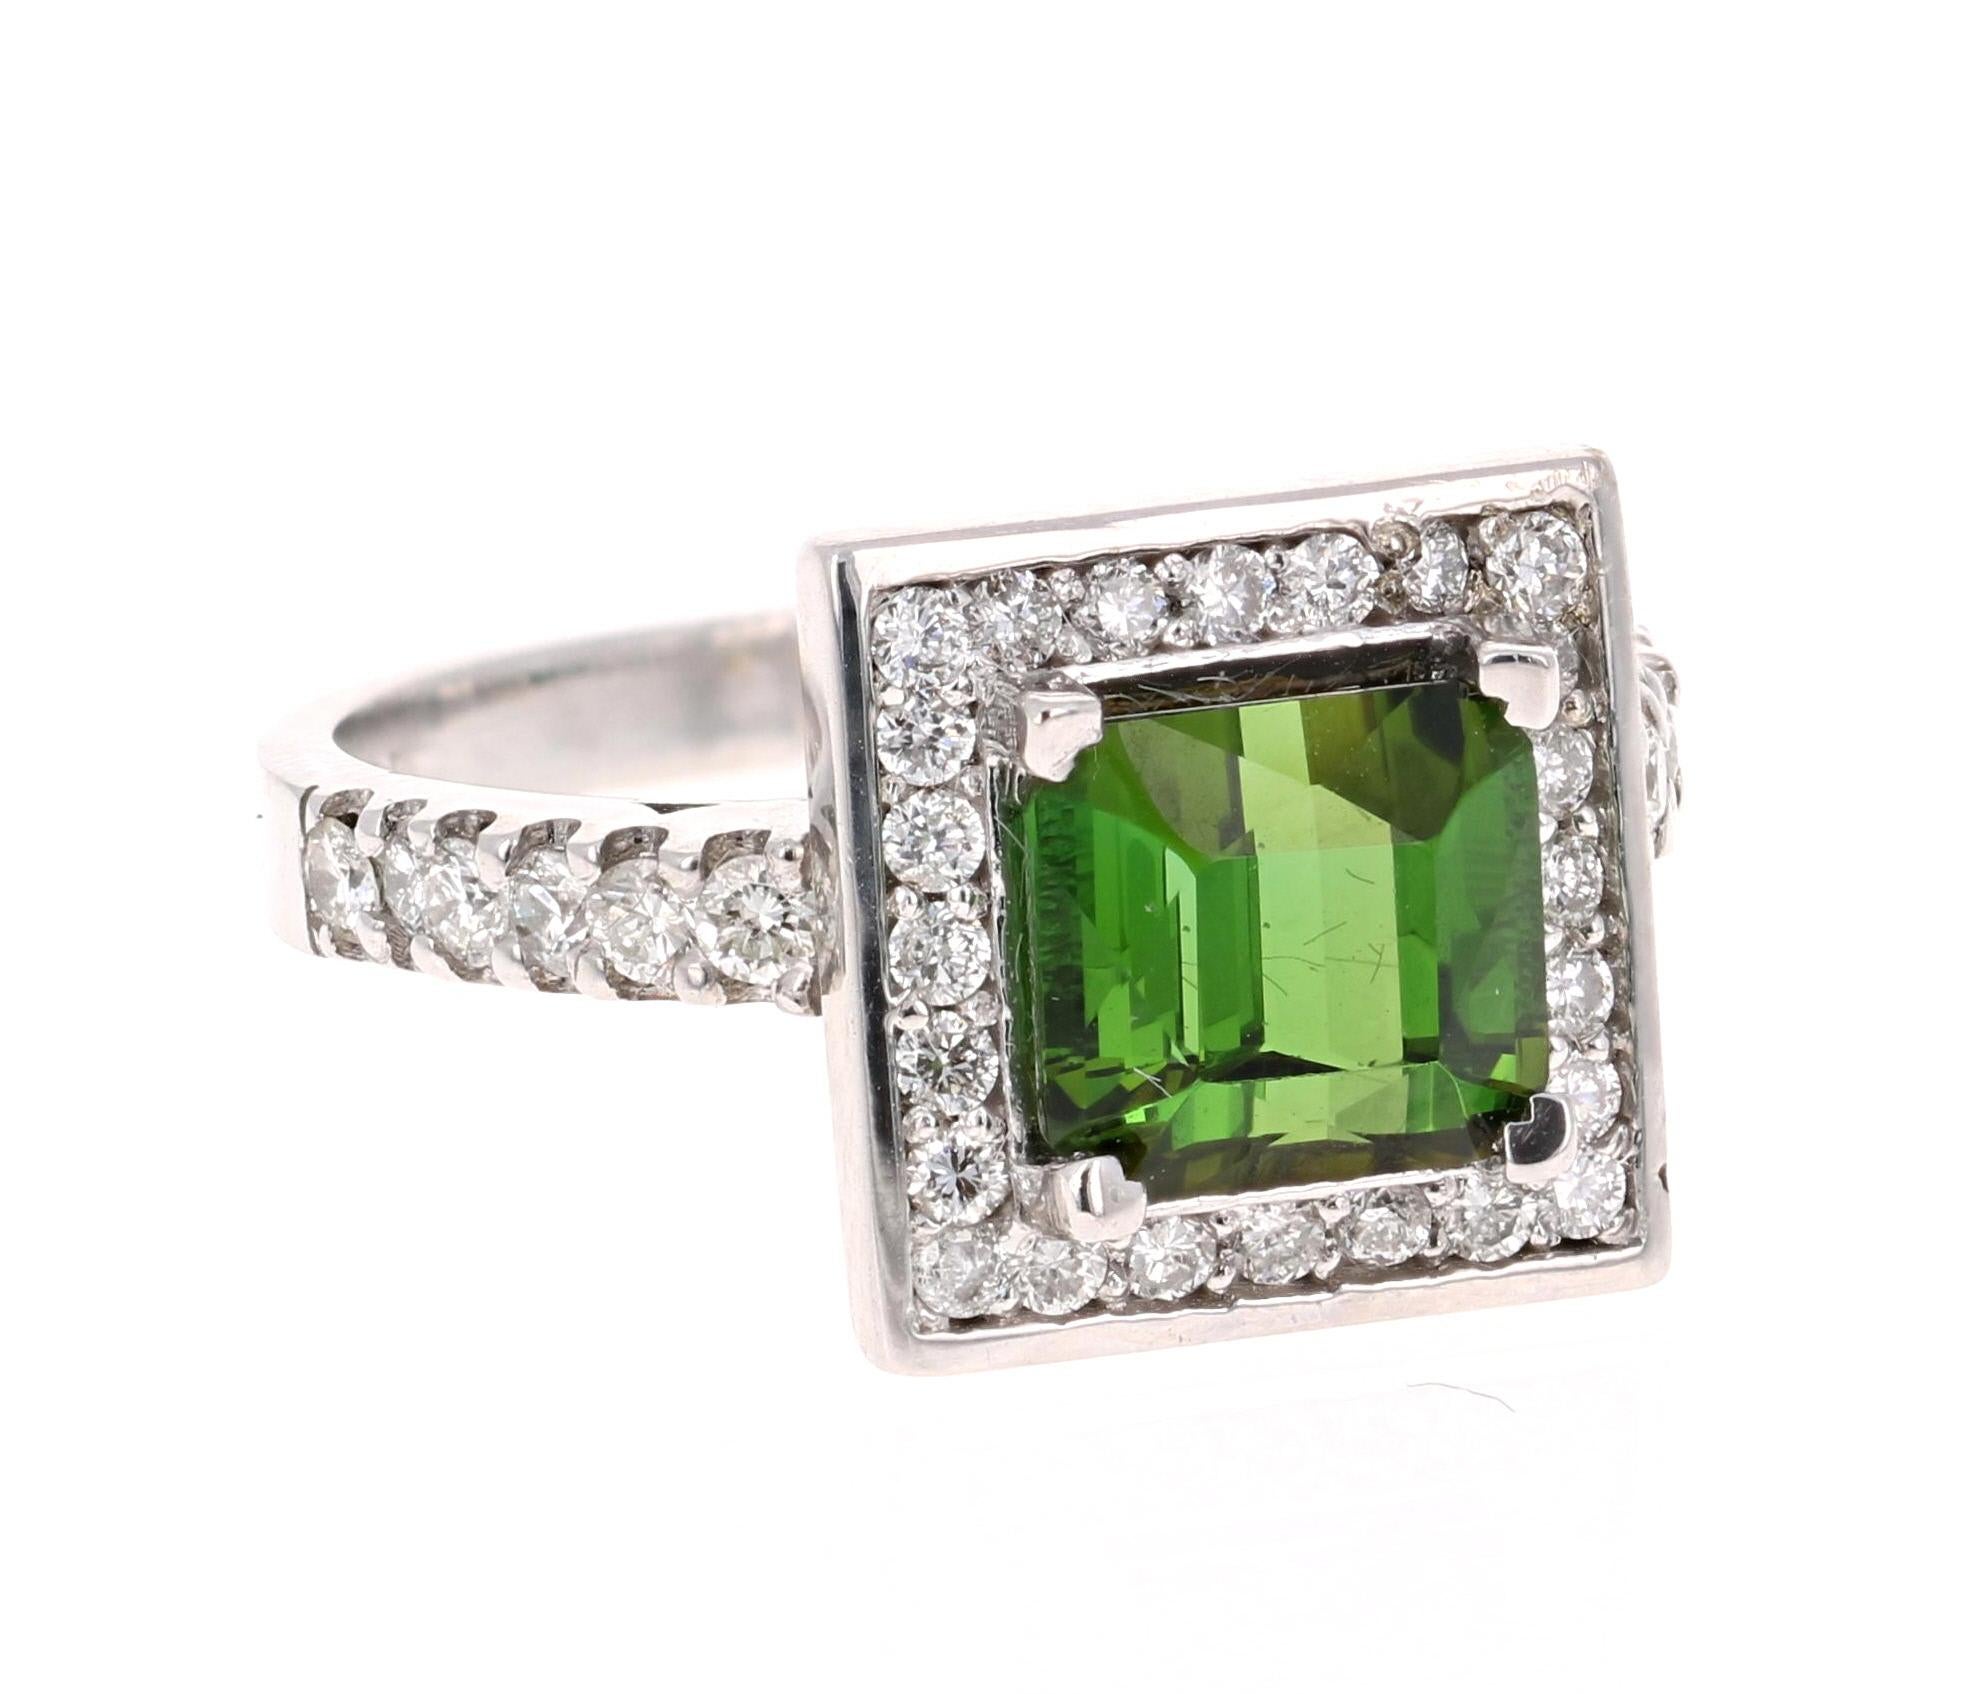 
This stunner has a Square Cut Green Tourmaline that weighs 2.31 Carats. The Tourmaline is surrounded by 36 Round Cut Diamonds weighing 0.62 Carats.  The total carat weight of the ring is 2.93 Carats. 

The ring is made in 14 Karat White Gold and